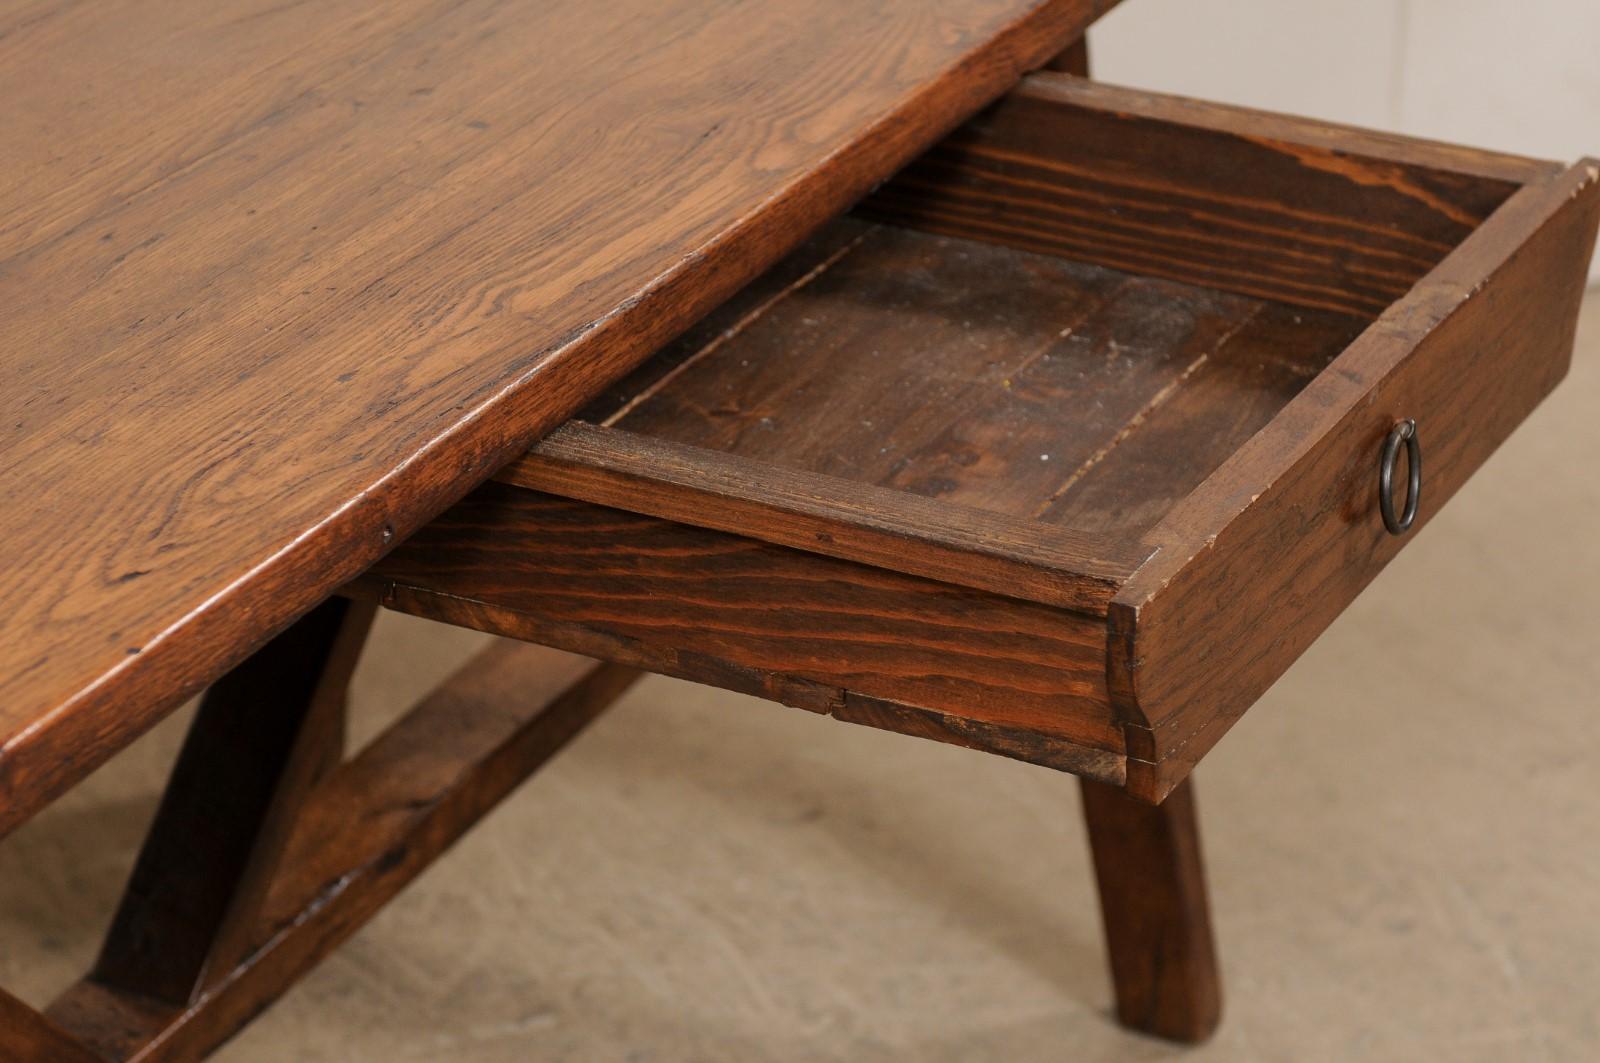 18th Century Early 18th C. Italian Walnut Table with V-Stretcher, a Great Desk Option